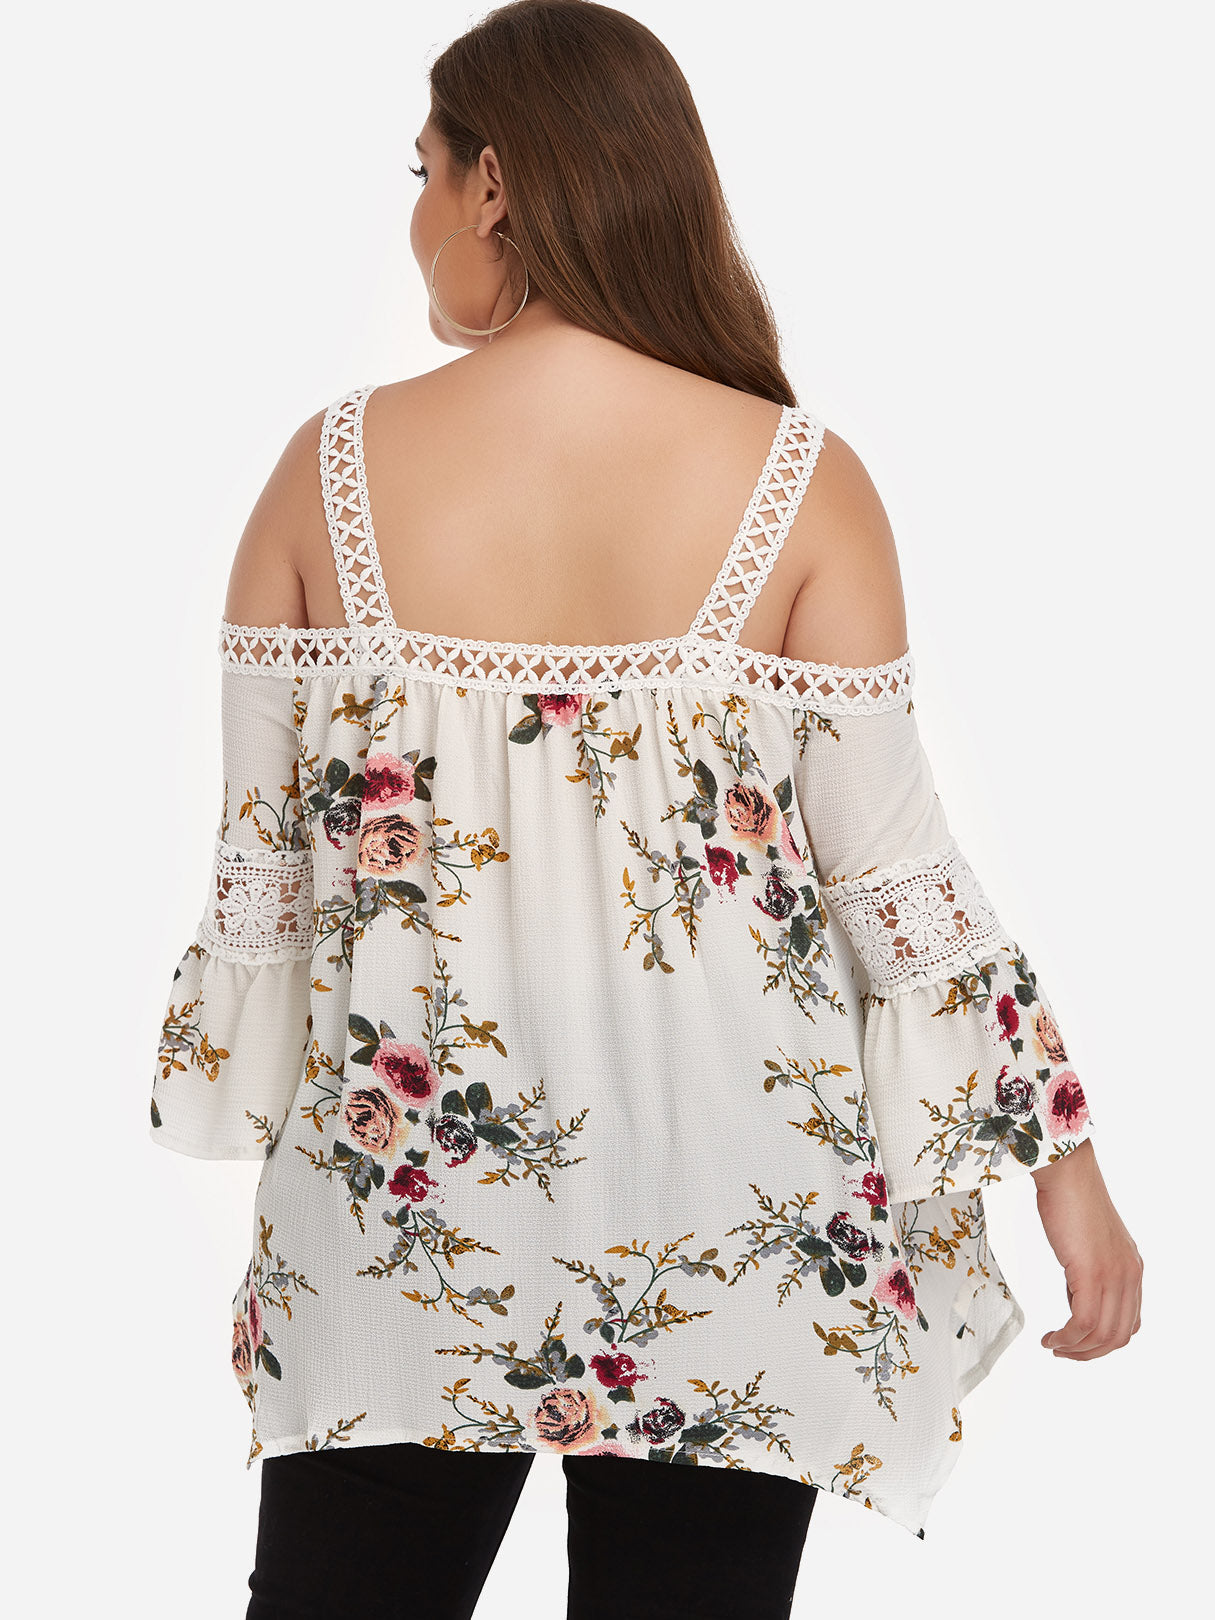 NEW FEELING Womens Floral Plus Size Tops